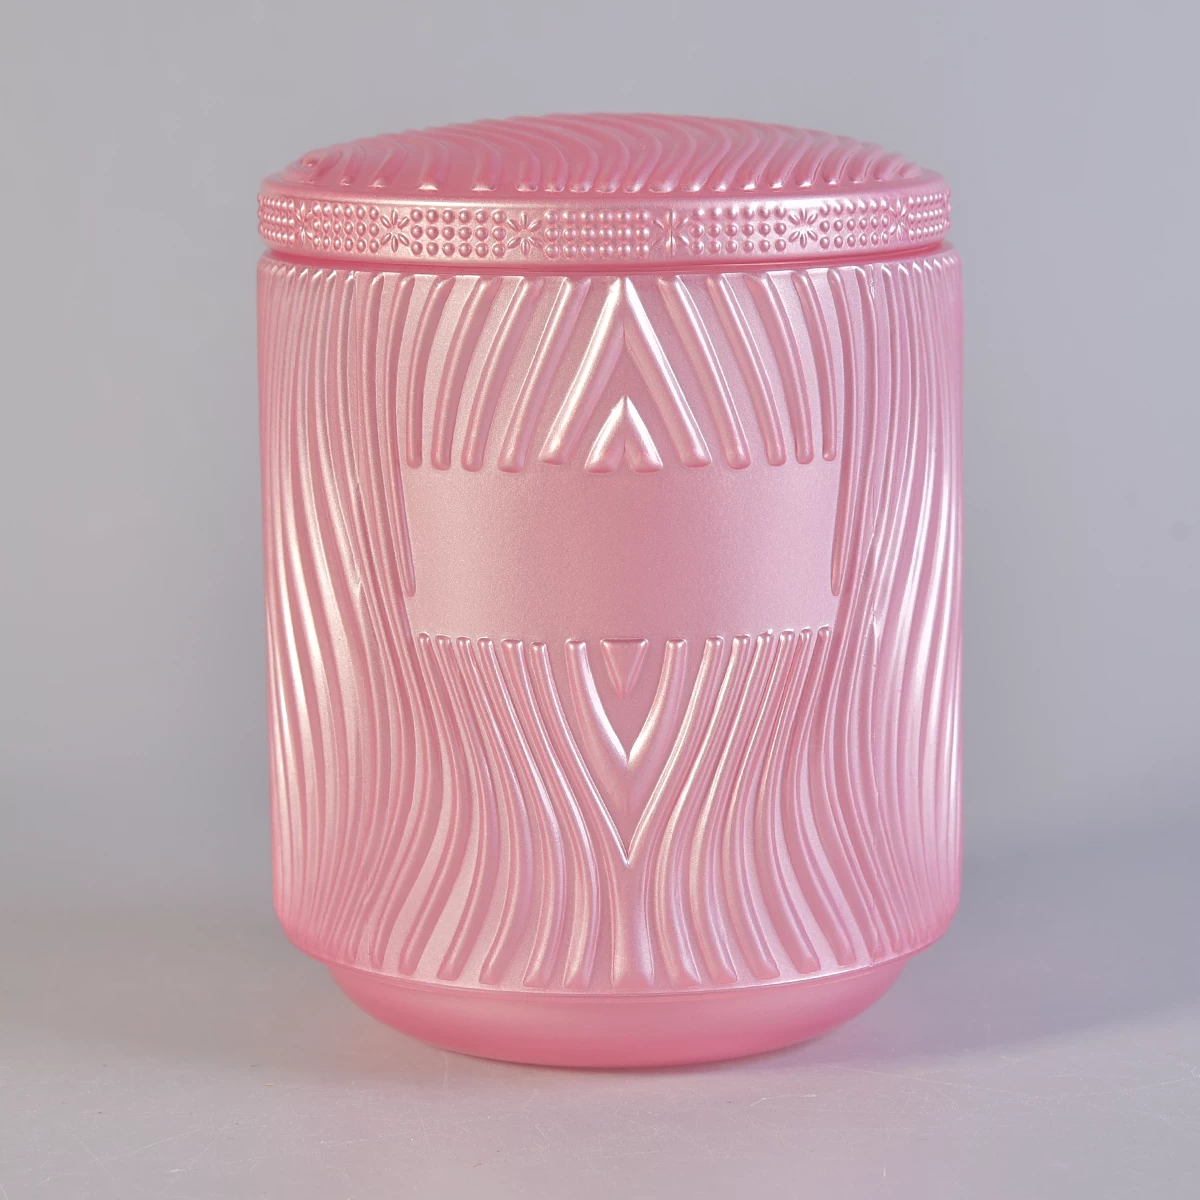 Colored glass candle container, unique glass candle holder with embossed pattern